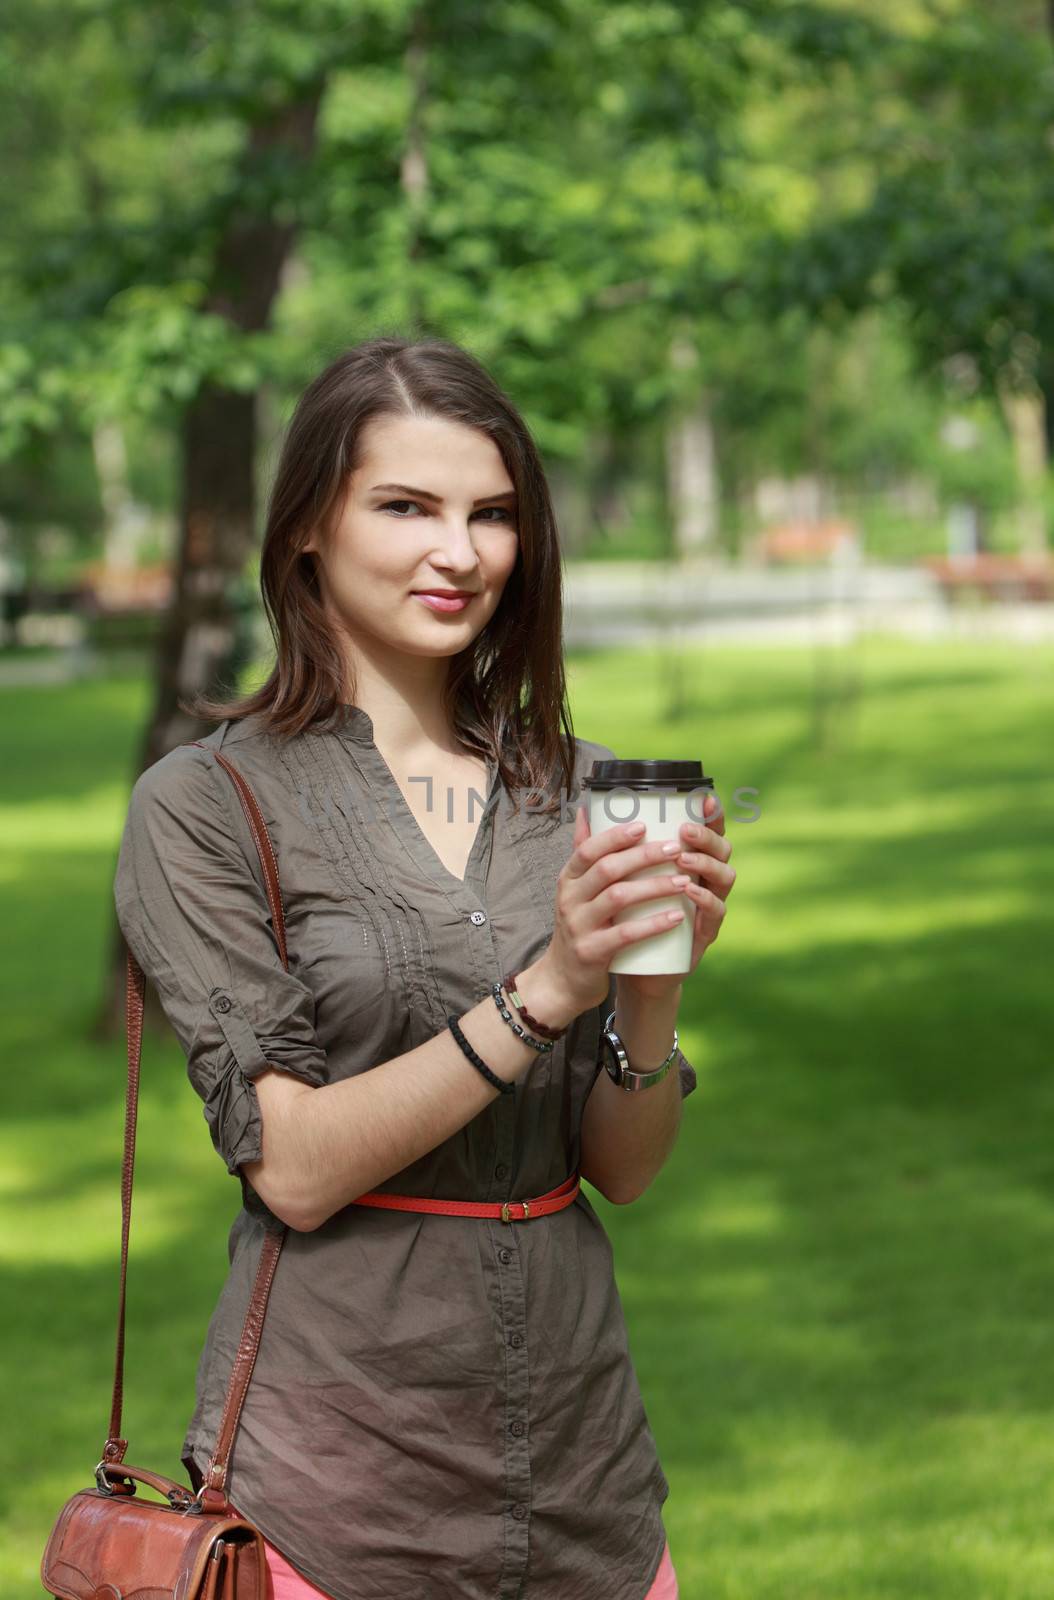 Portrait of a young woman holding a disposable cup of coffee outdoor in a park.